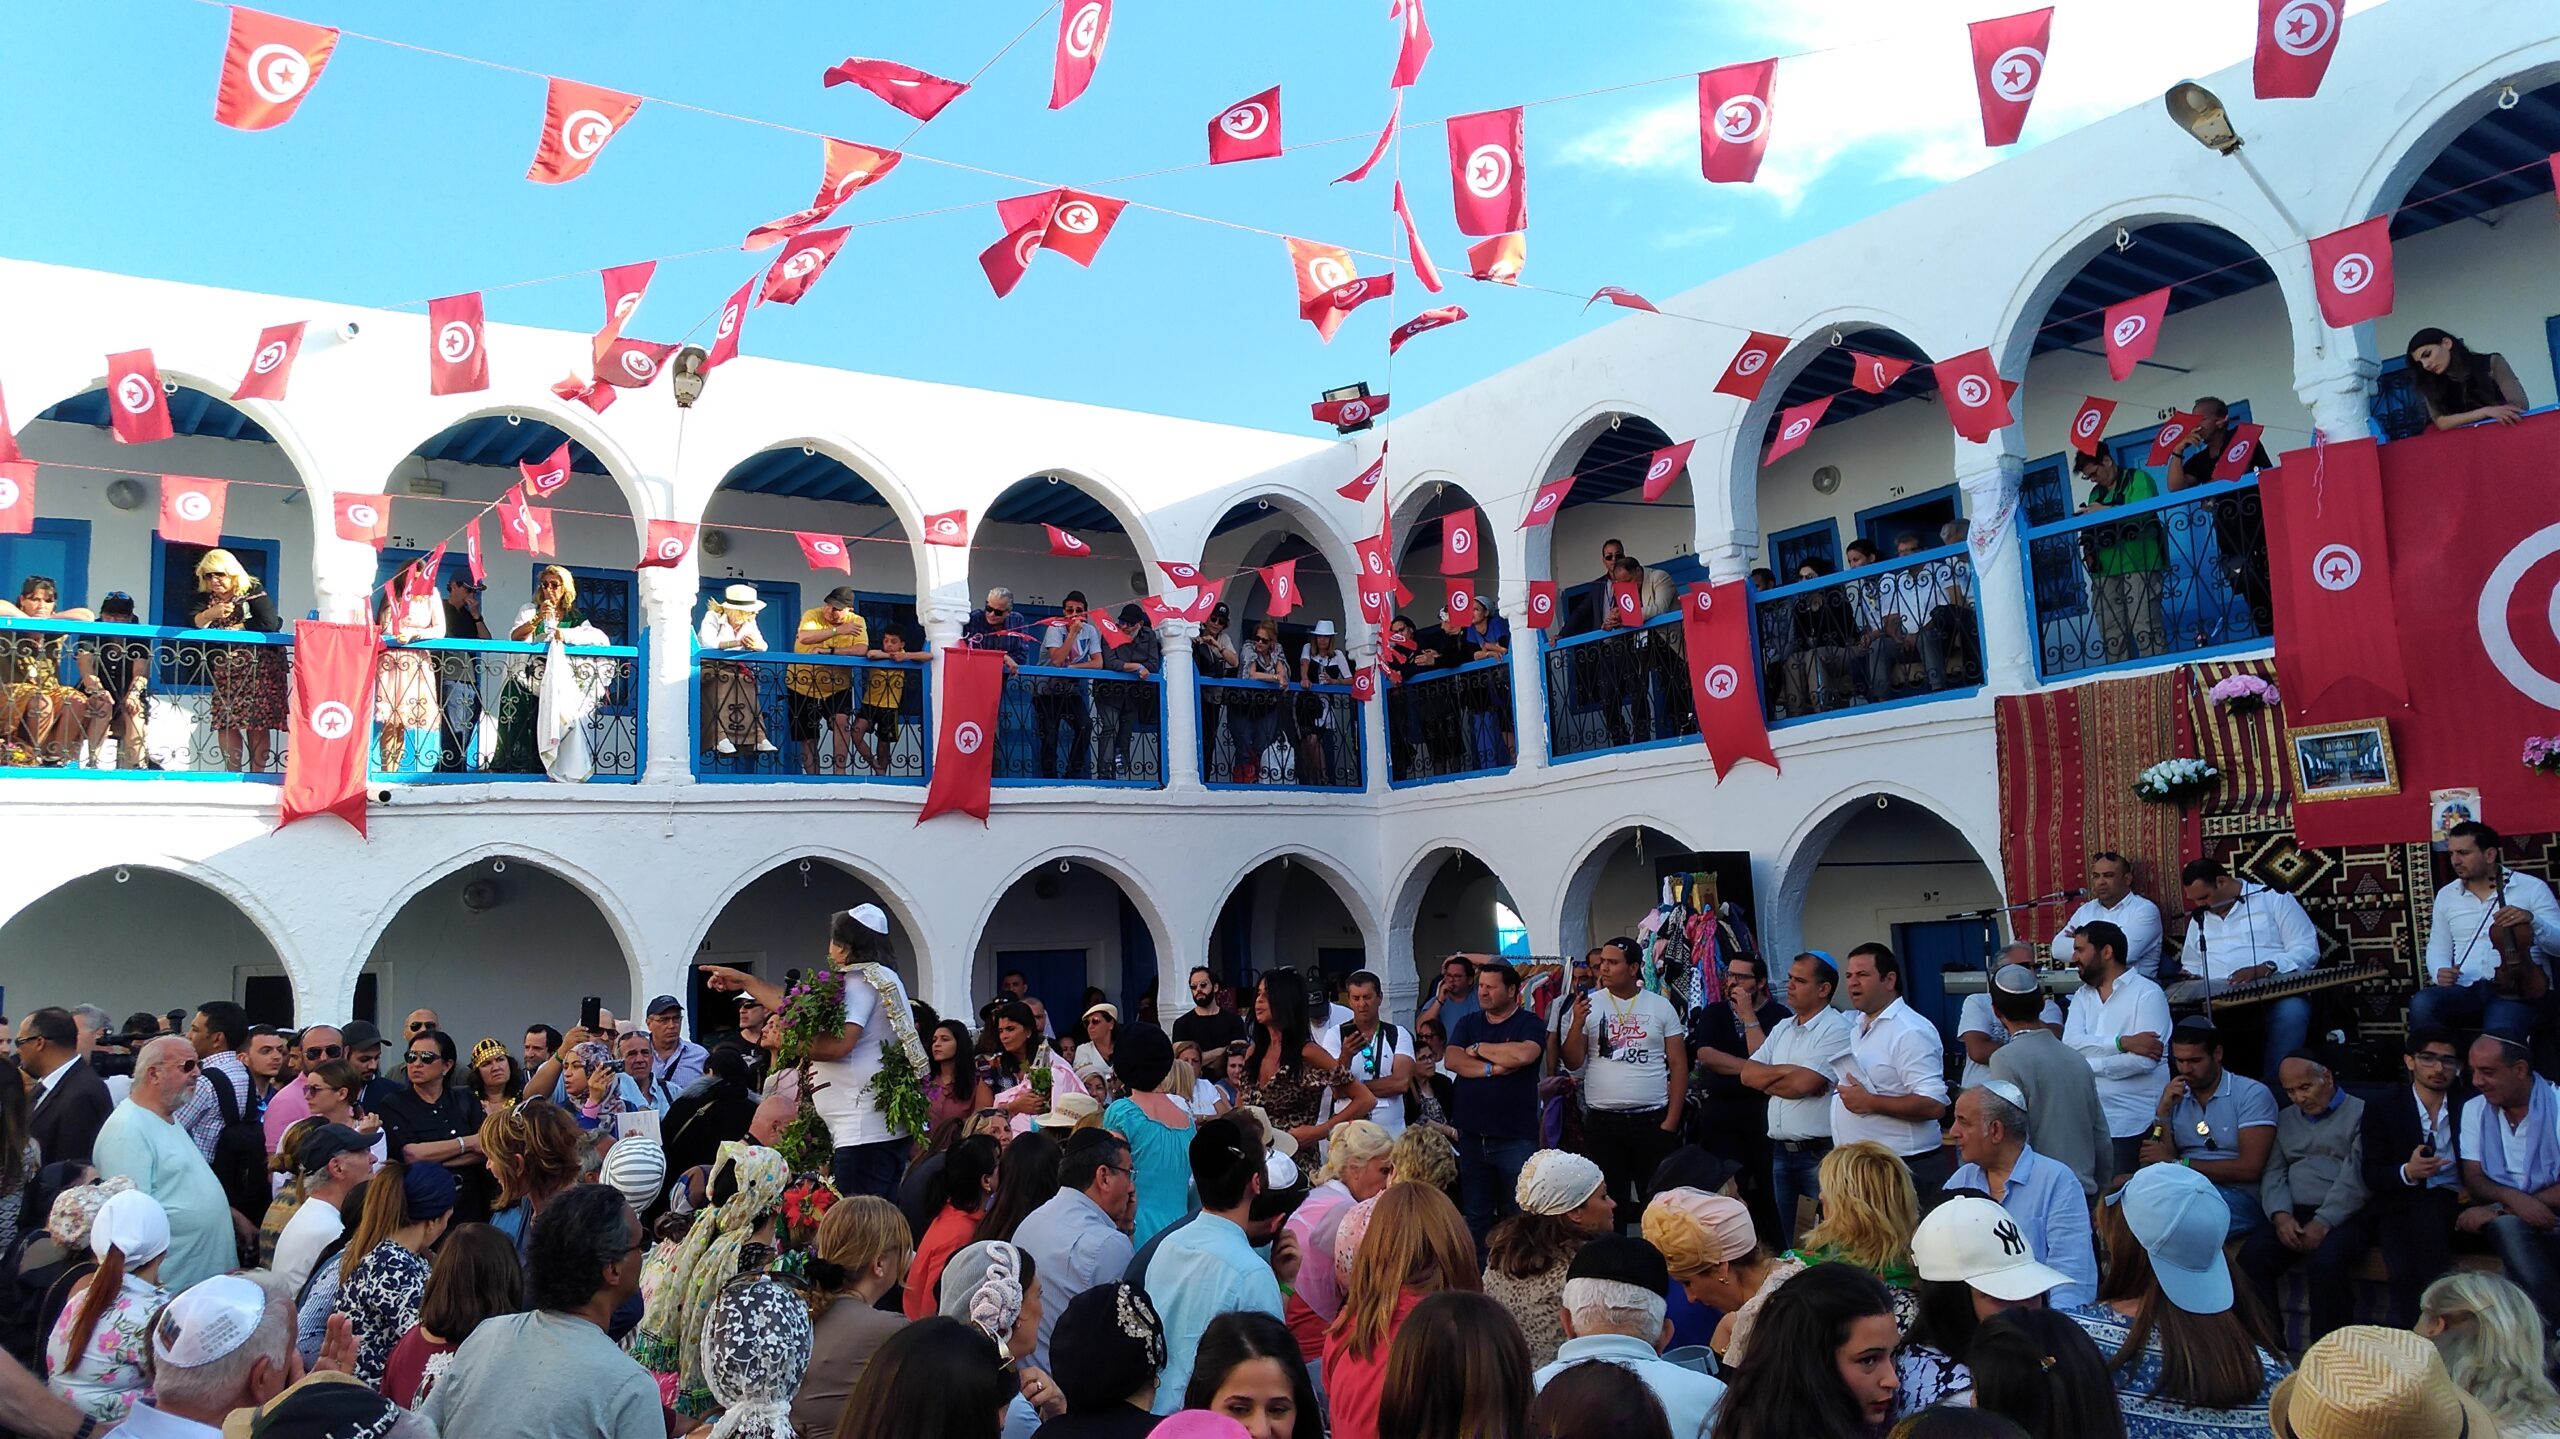 Oukala filled with pilgrims for the annual auction to add scarves to the menara and the right to push the menara during the procession (photo: Zied Touzani, Wikimedia Commons)